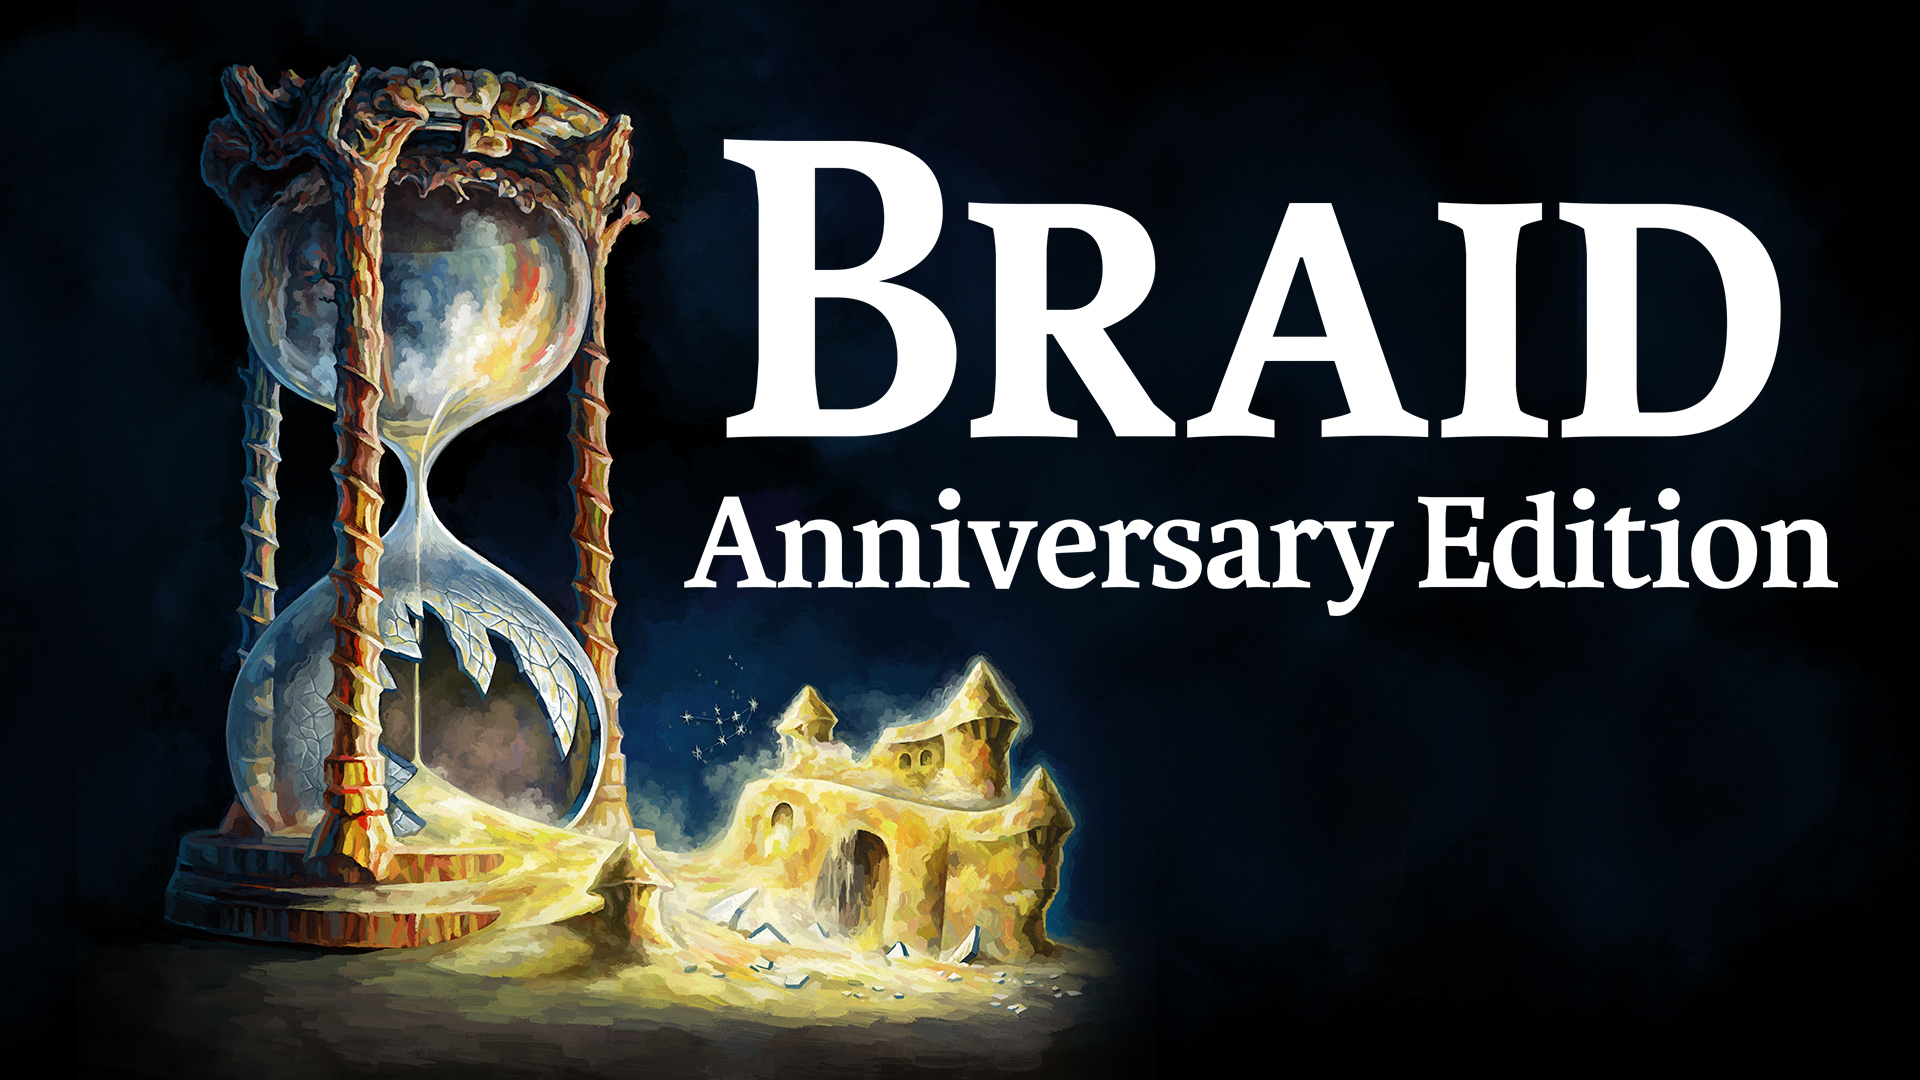 Braid, Anniversary Edition will be released on Nintendo Switch with a slight delay.